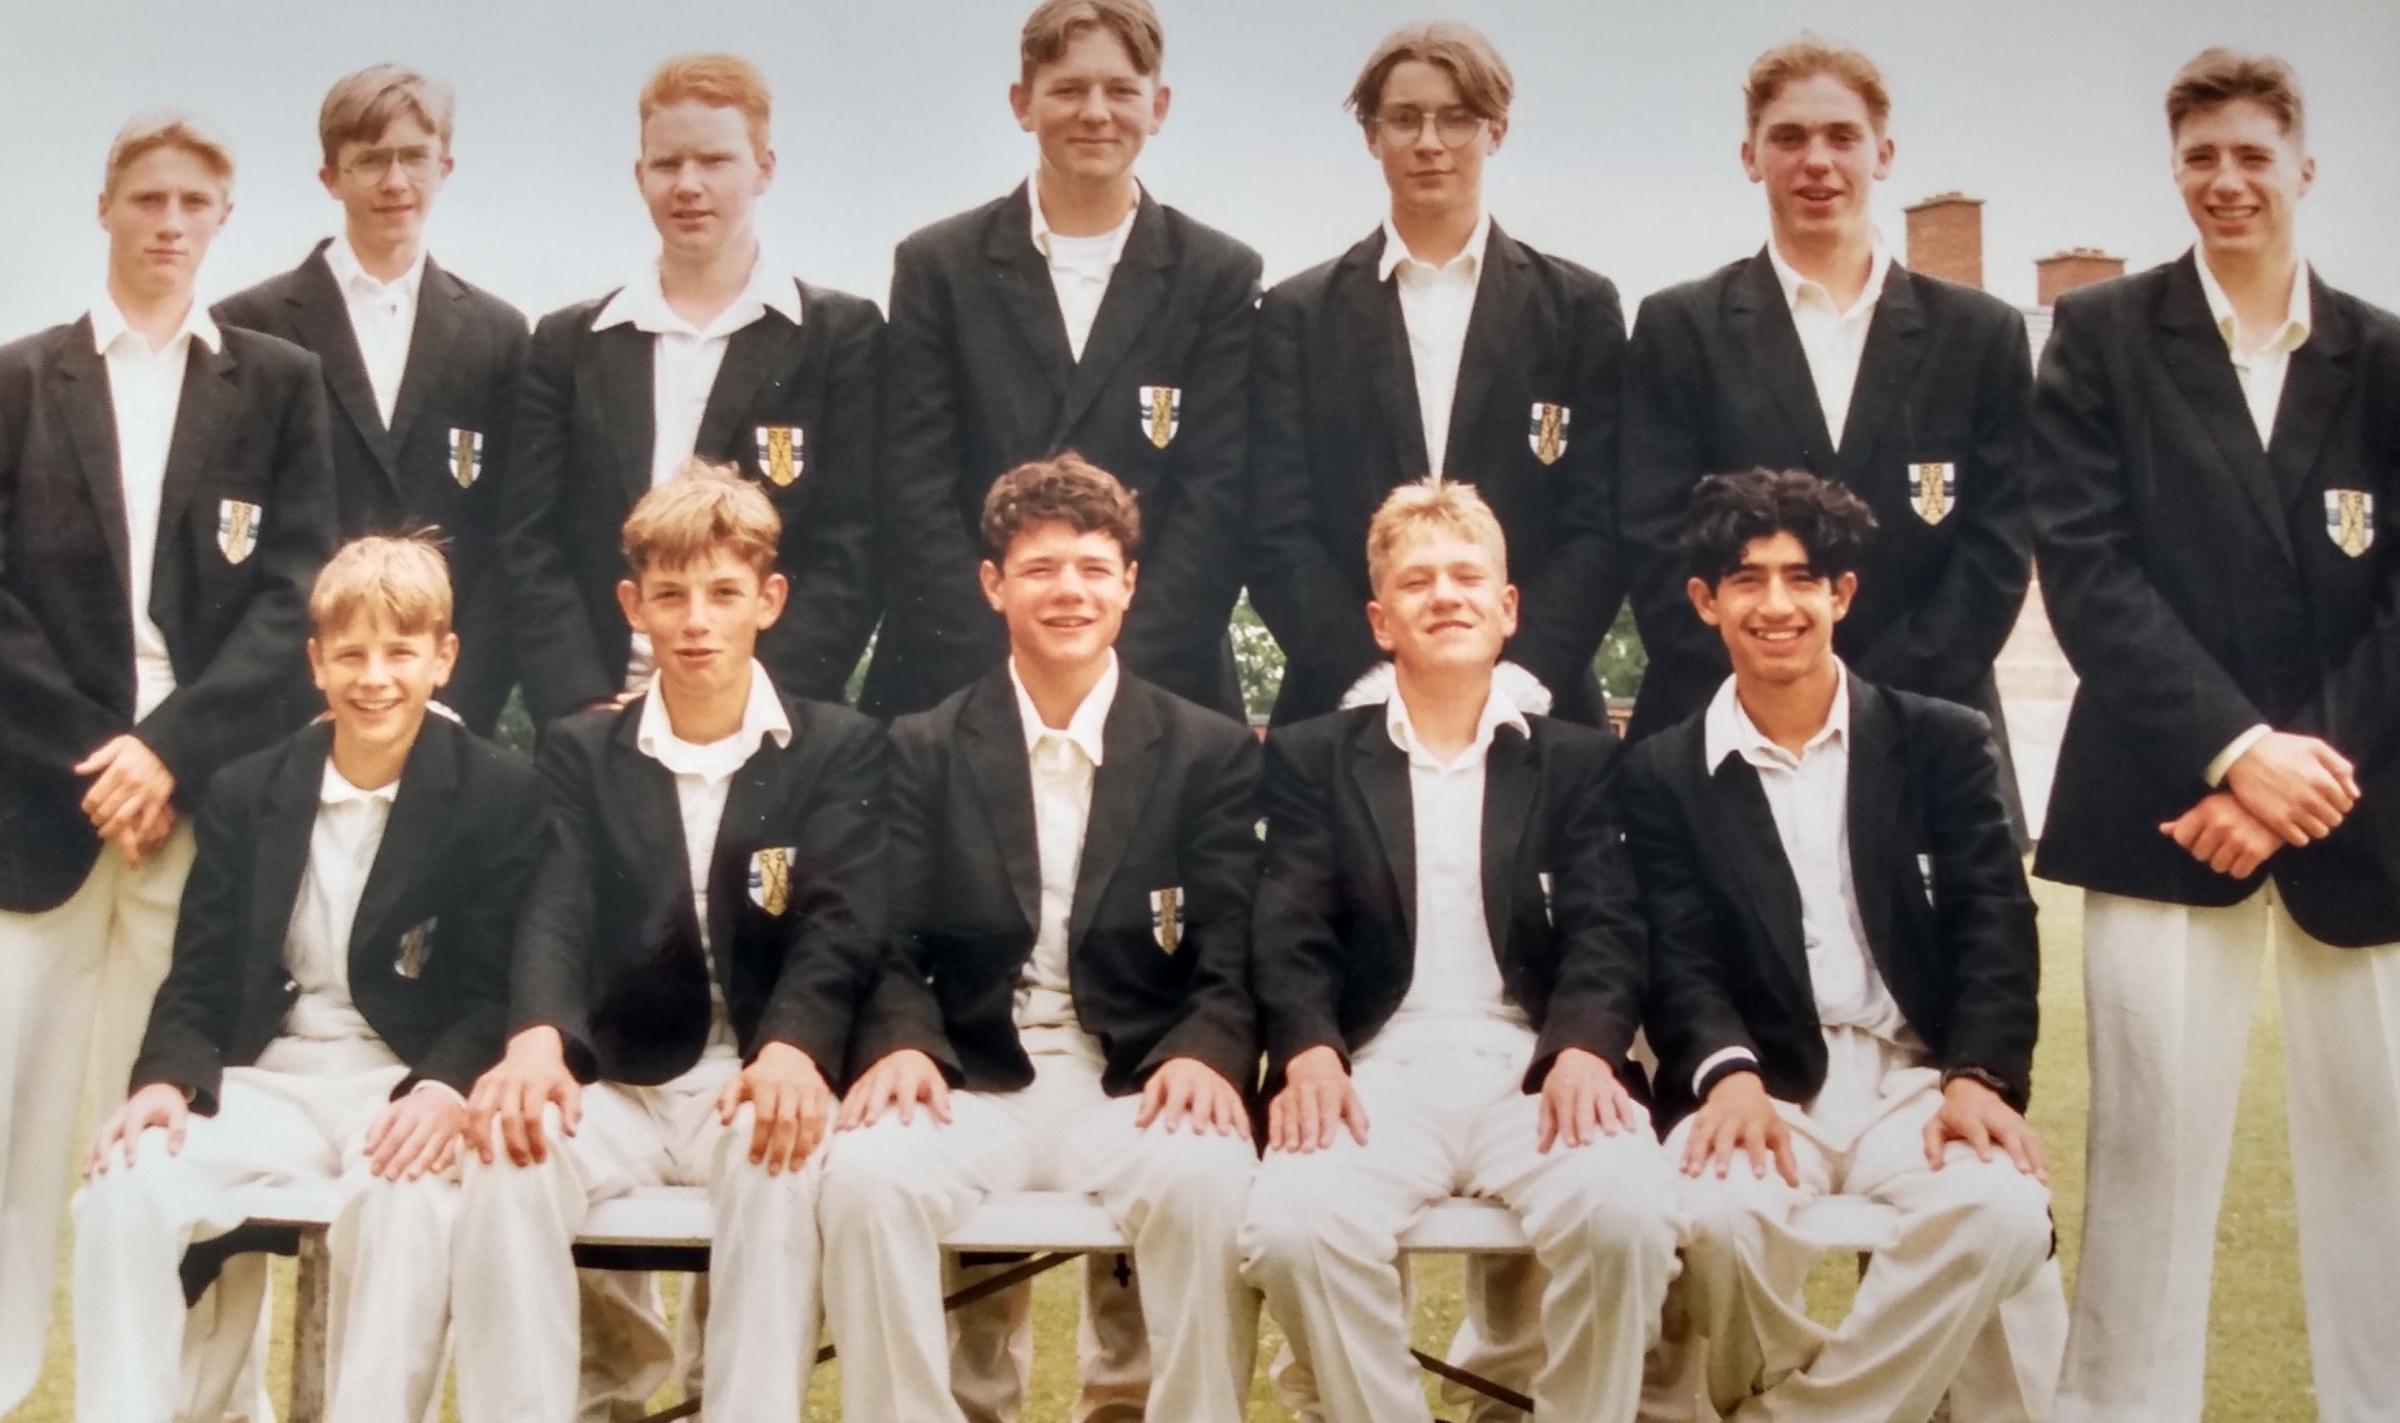 July 1994 and looking spruce in blazers and flannels are the schools cricketers